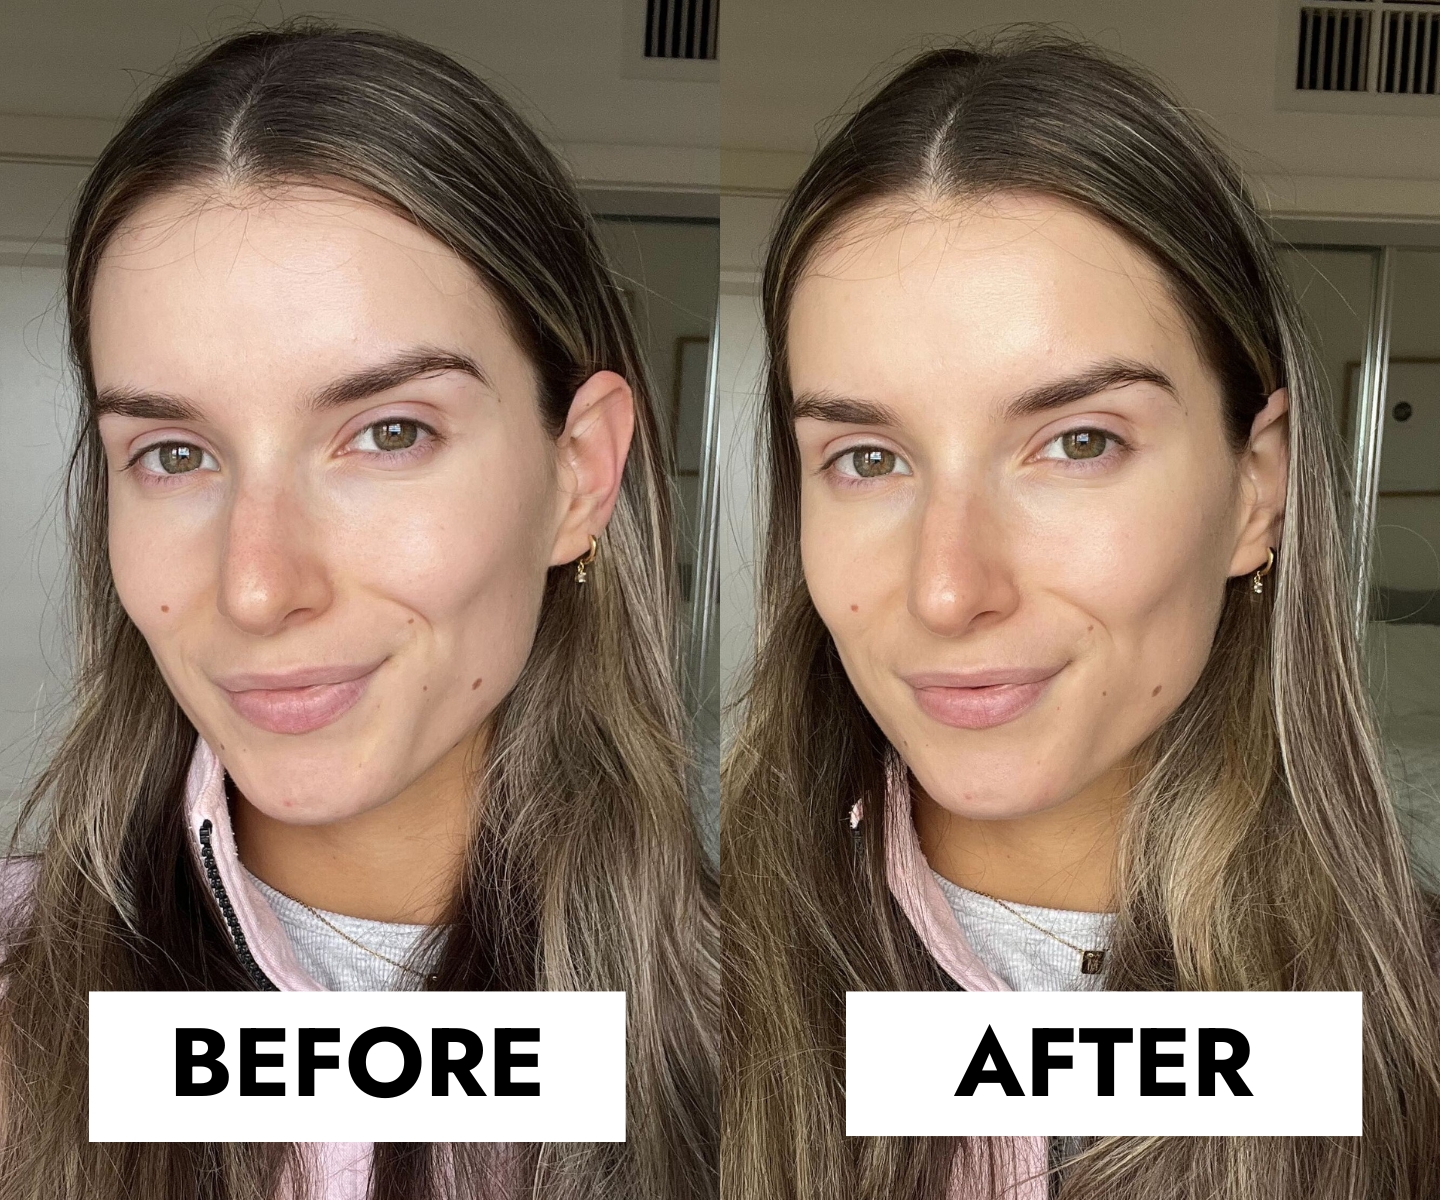 Maybelline 4-in-1 Instant Perfector - Megan selfie before/after